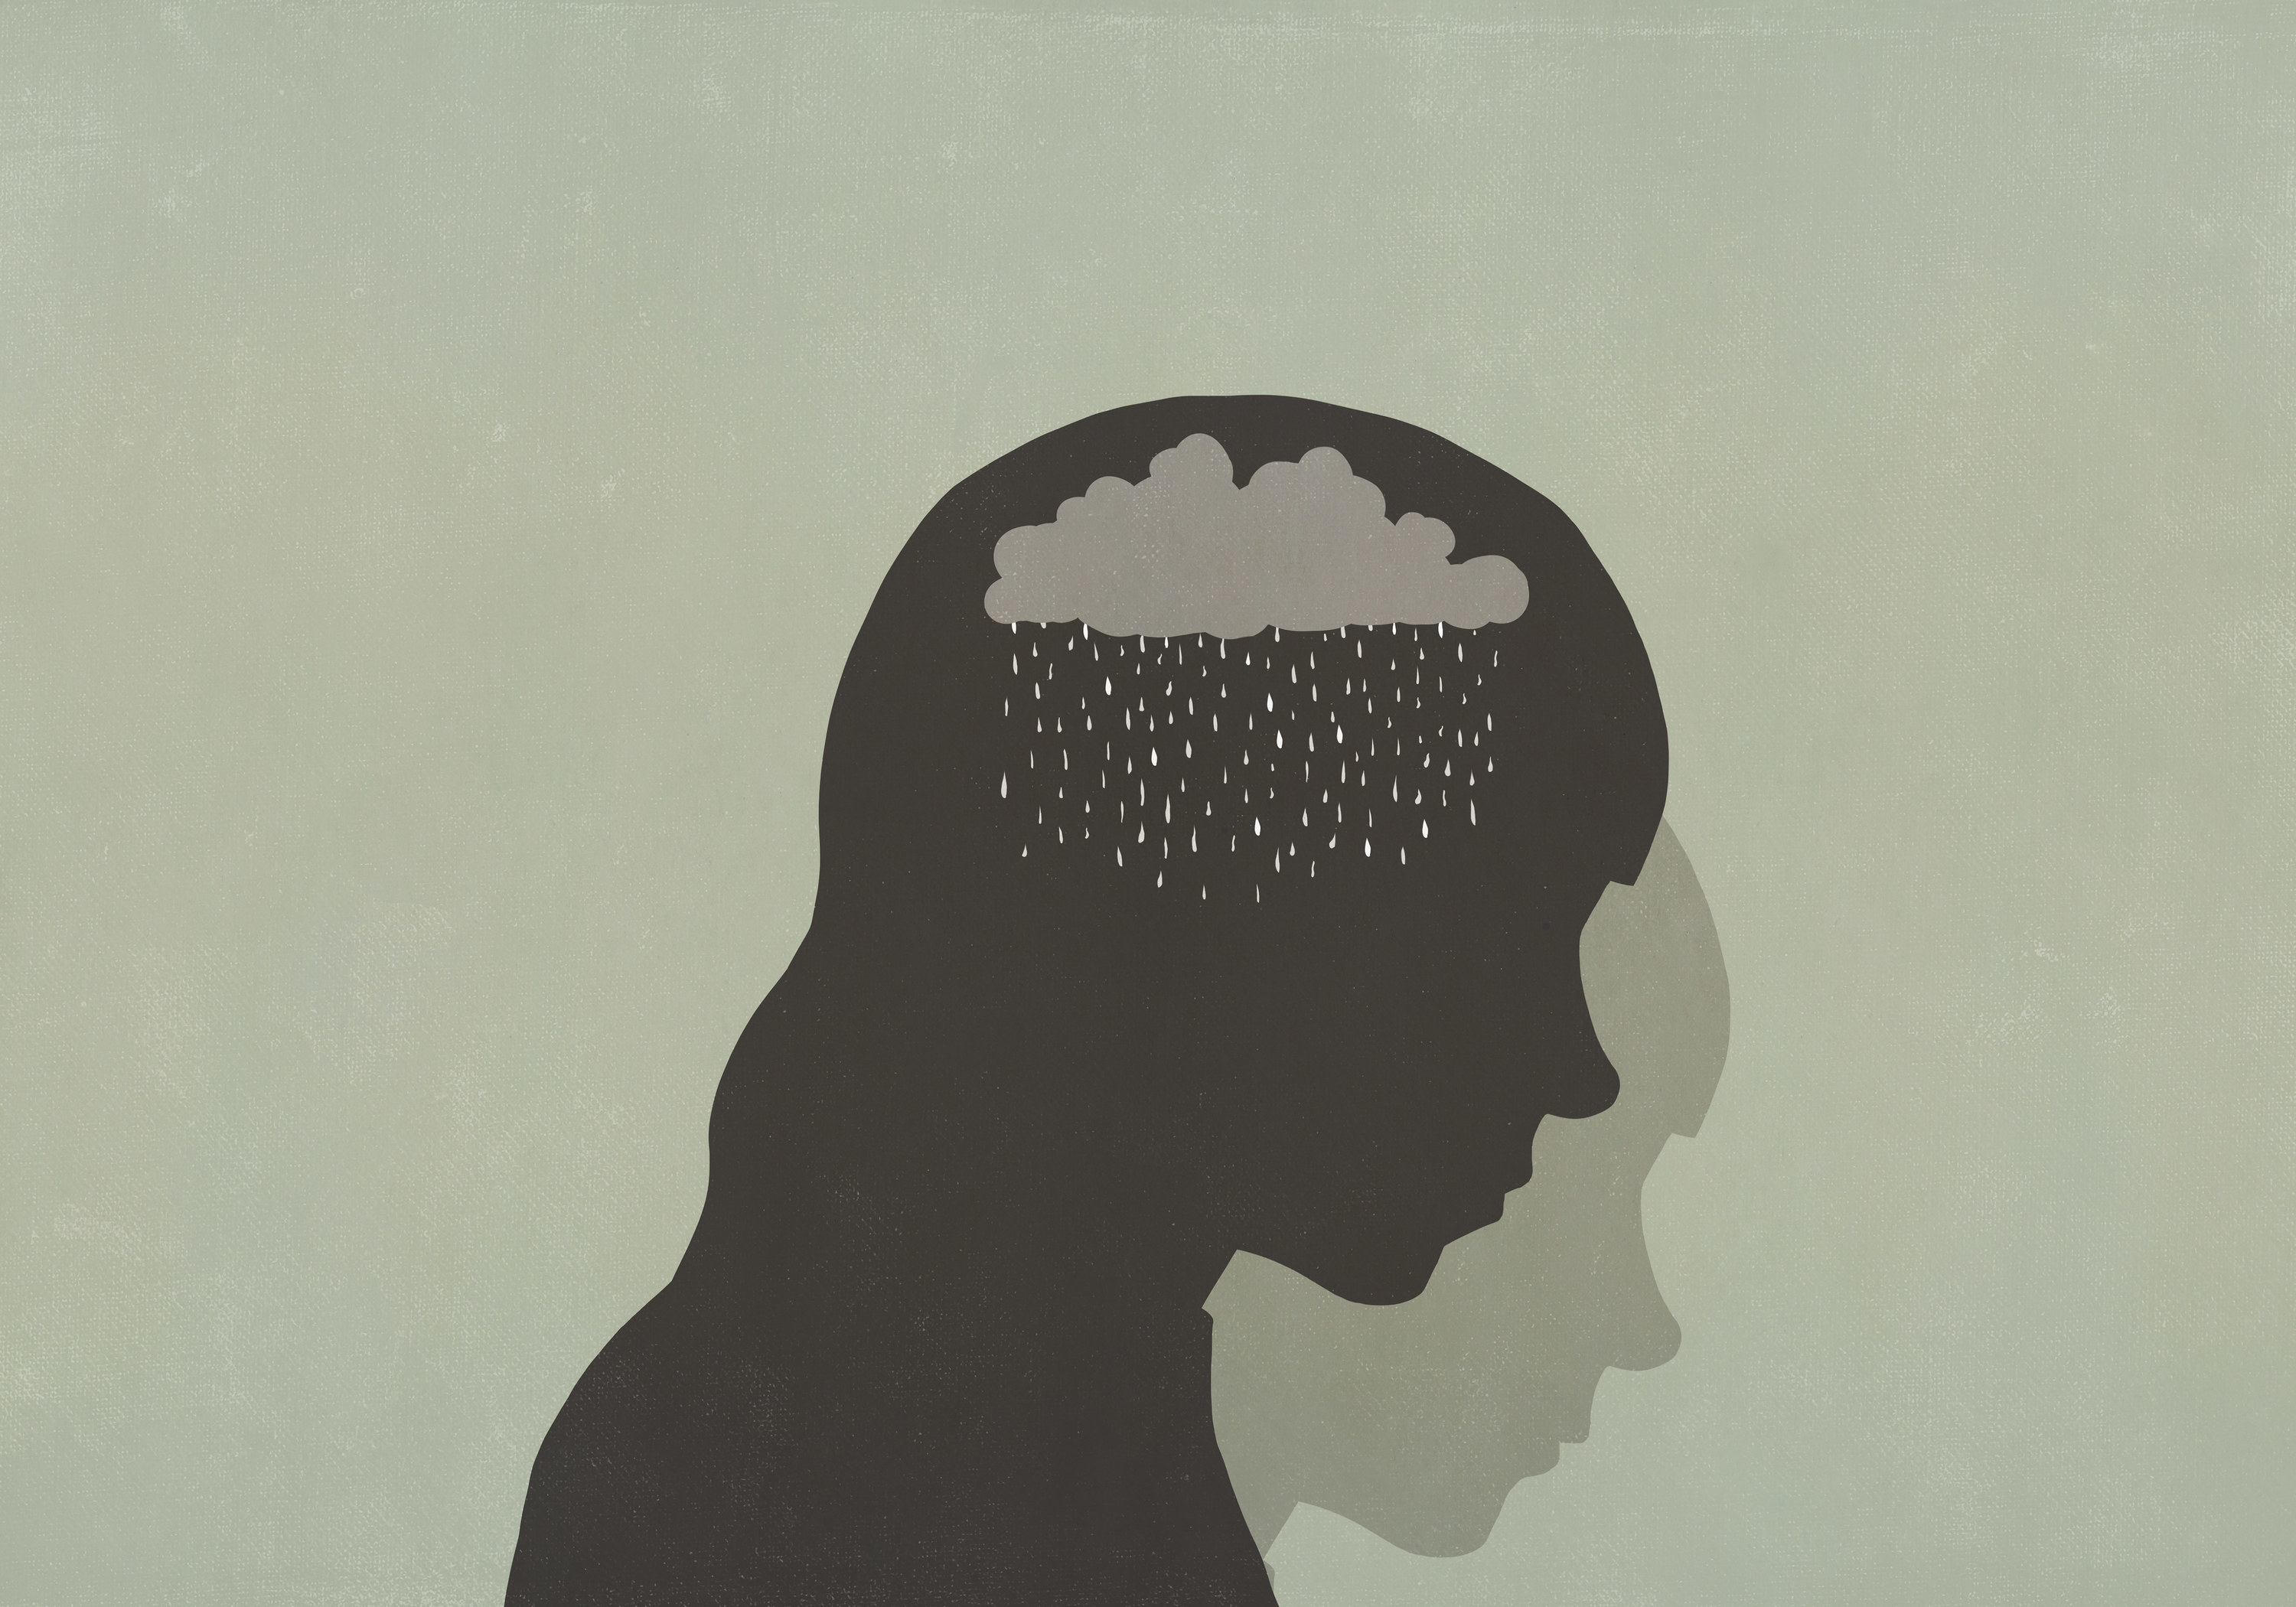 An illustrated image of the outline of a person with a cloud raining in their head, symbolizing depression